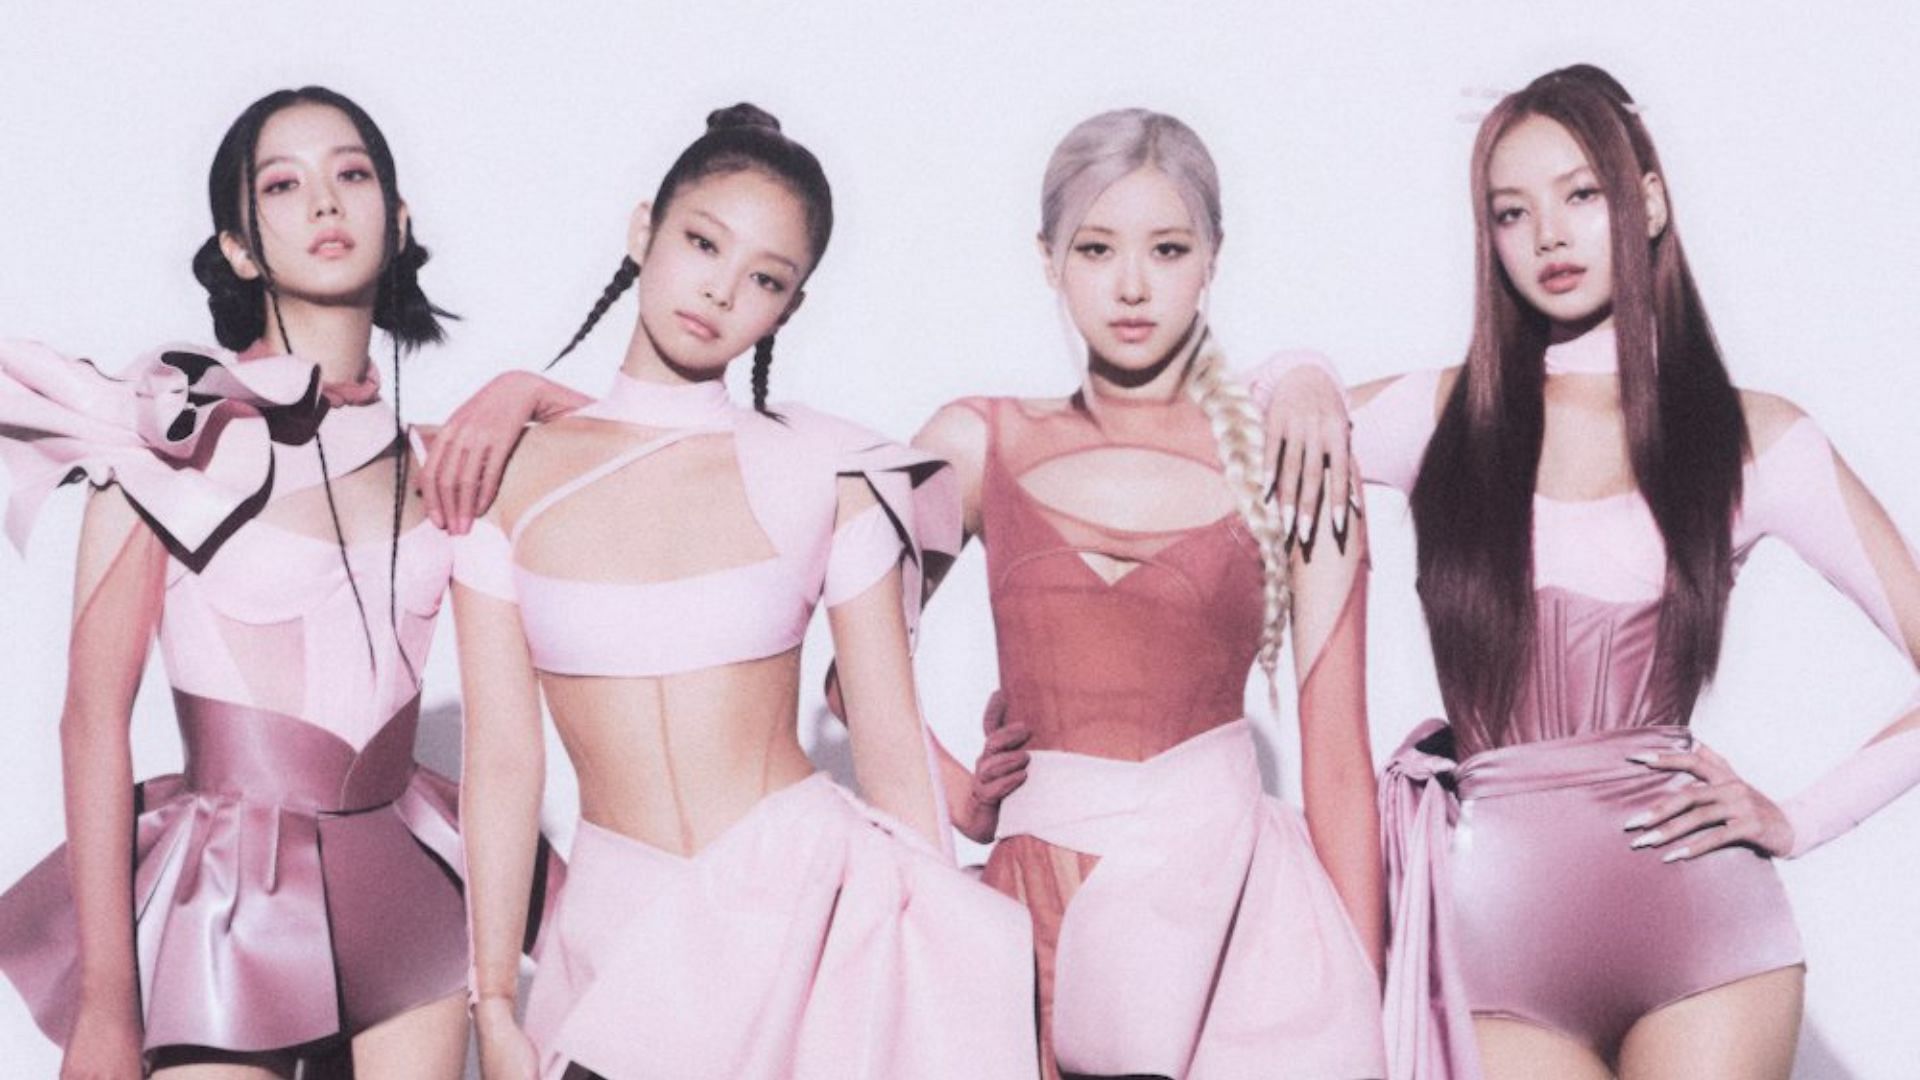 6 times BLACKPINK’s Pink Venom referenced their previous music videos